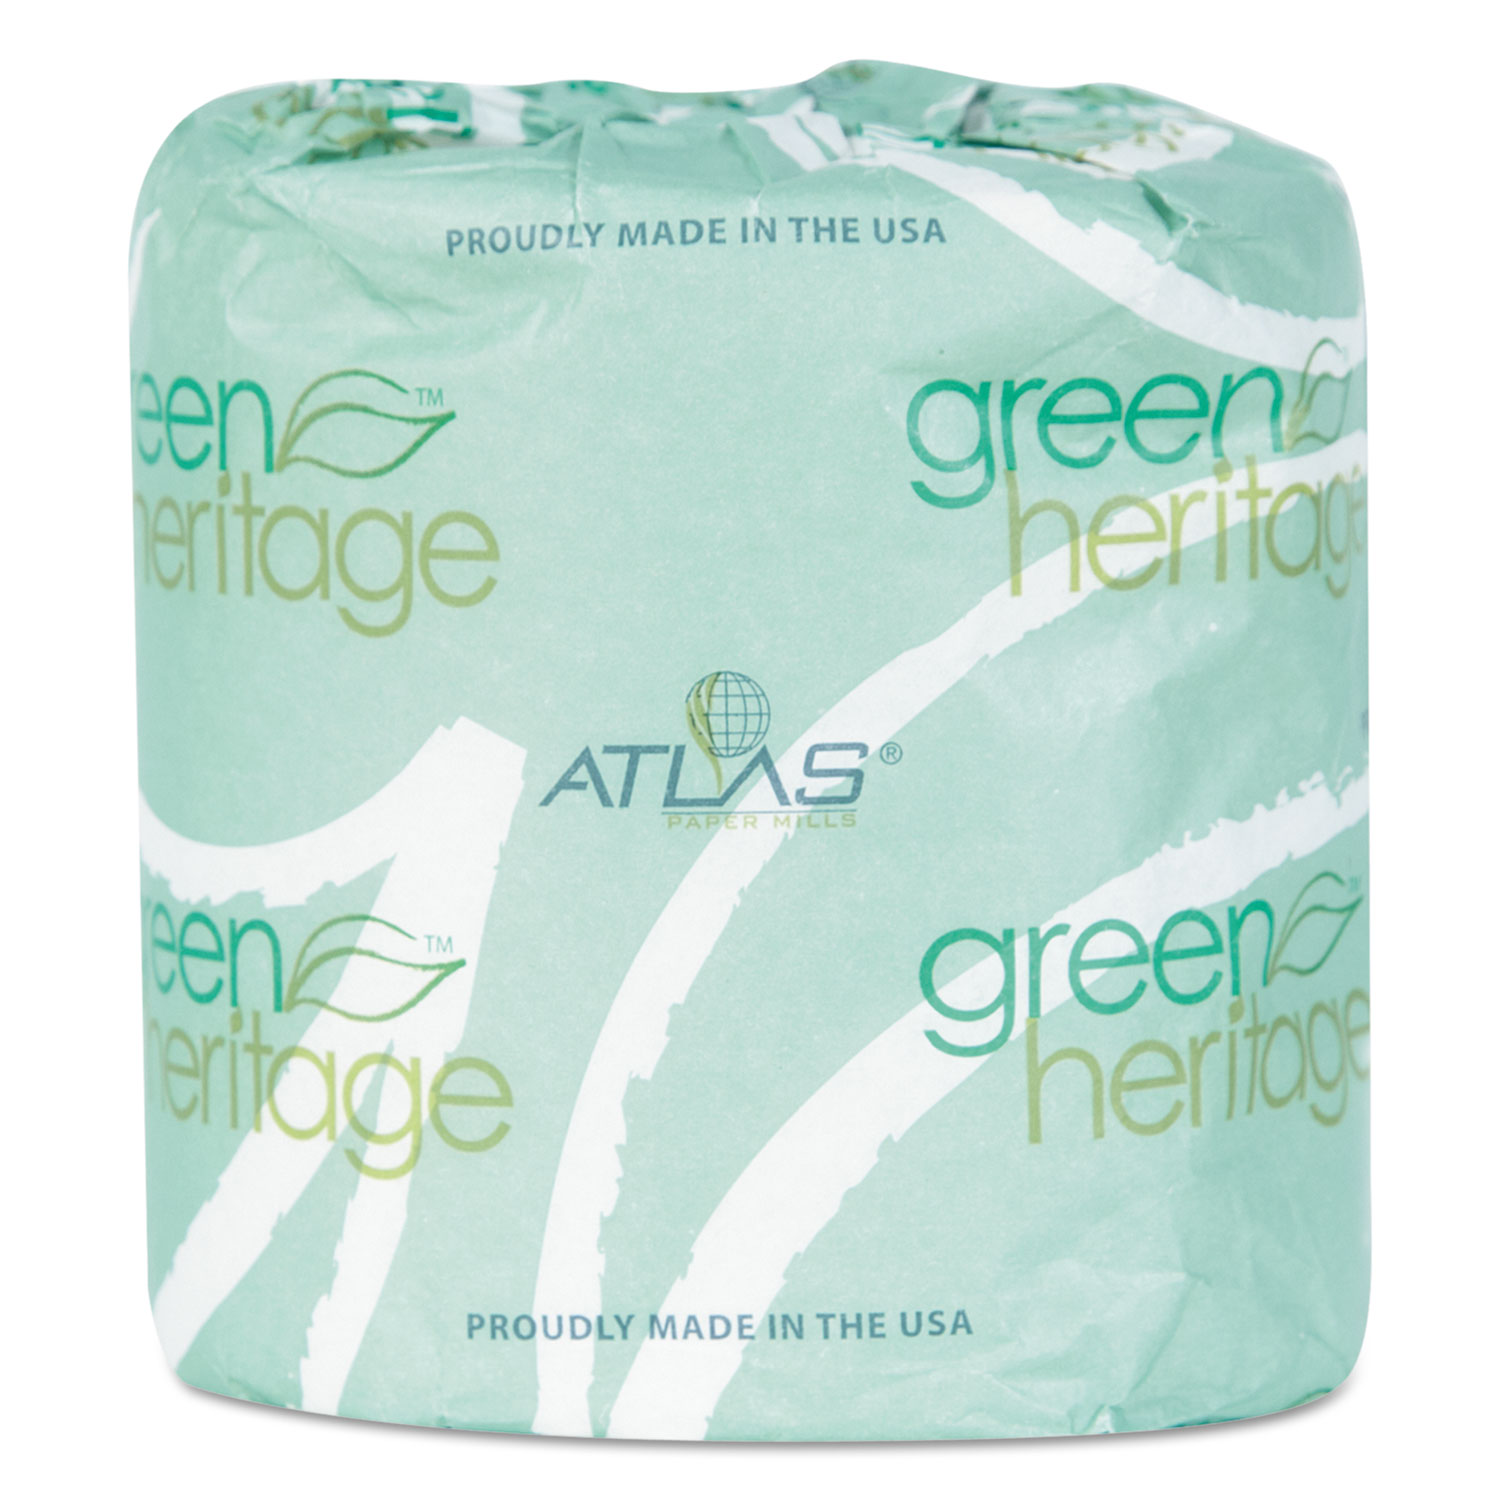 Green Heritage Toilet Tissue, 4 x 3.1 Sheets, 2Ply, 400/Roll, 96 Rolls/CT